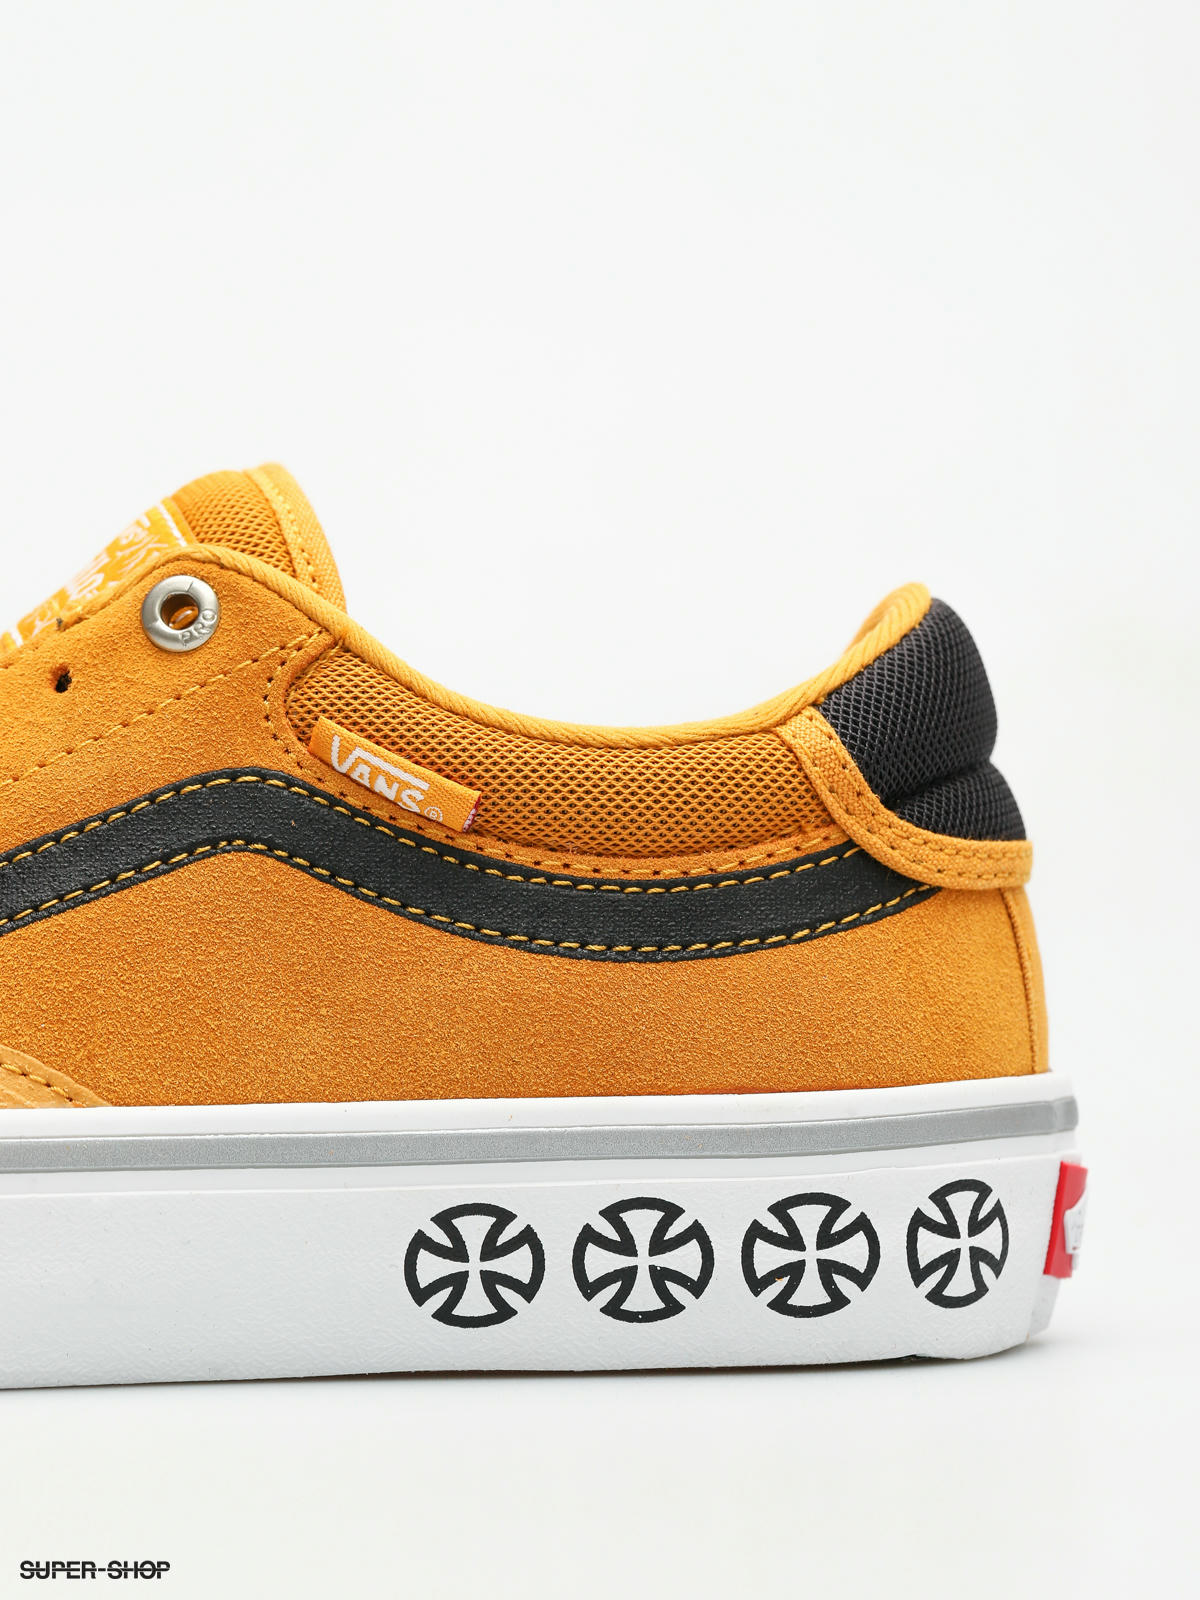 vans x independent tnt adv prototype sunflower & white skate shoes